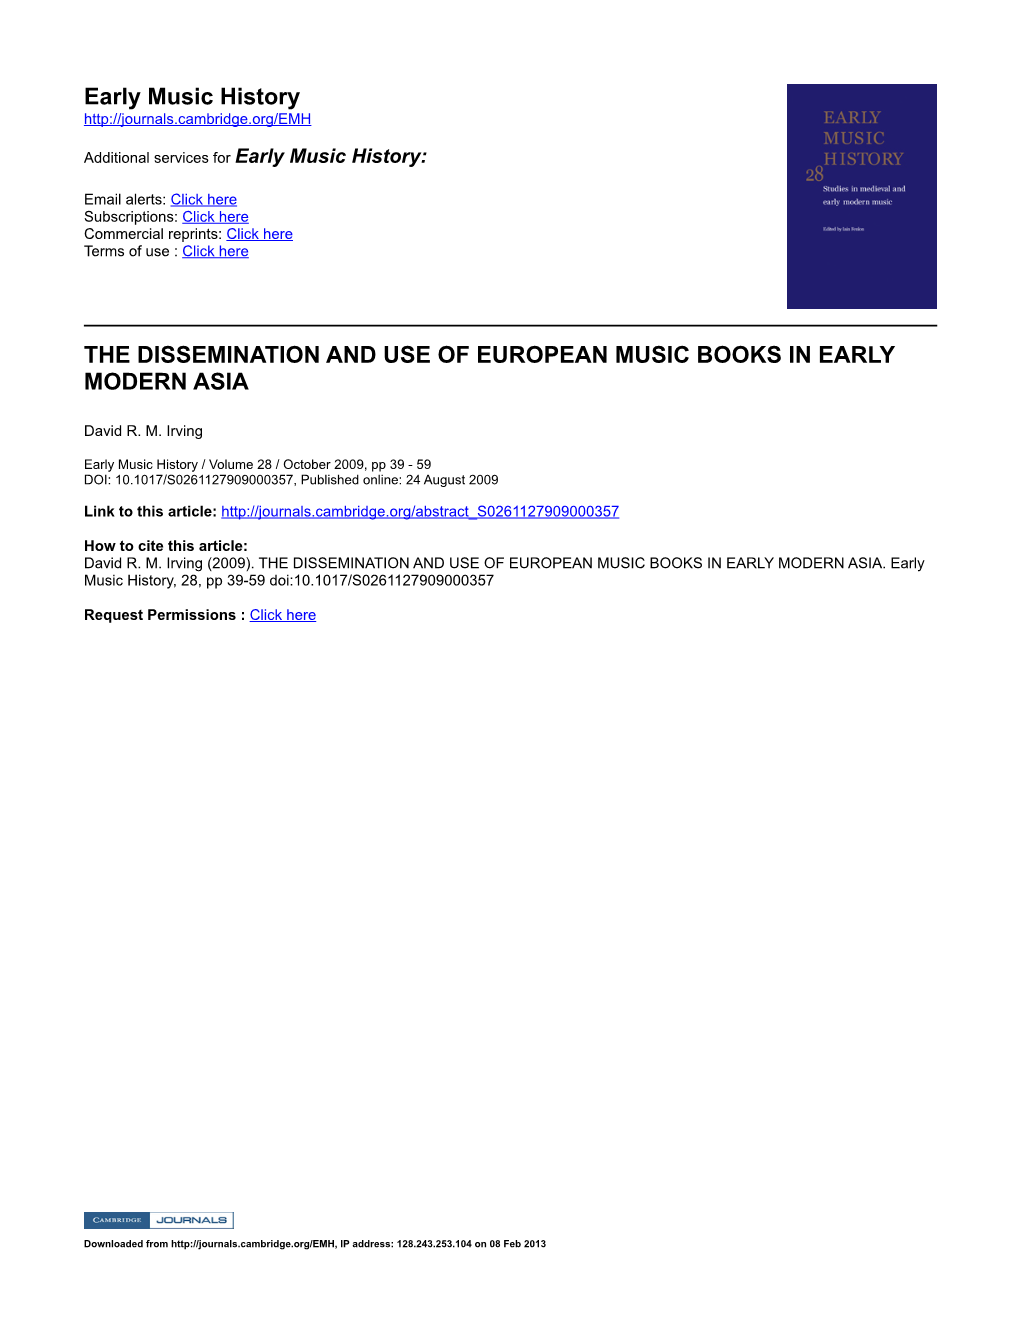 Early Music History the DISSEMINATION and USE OF